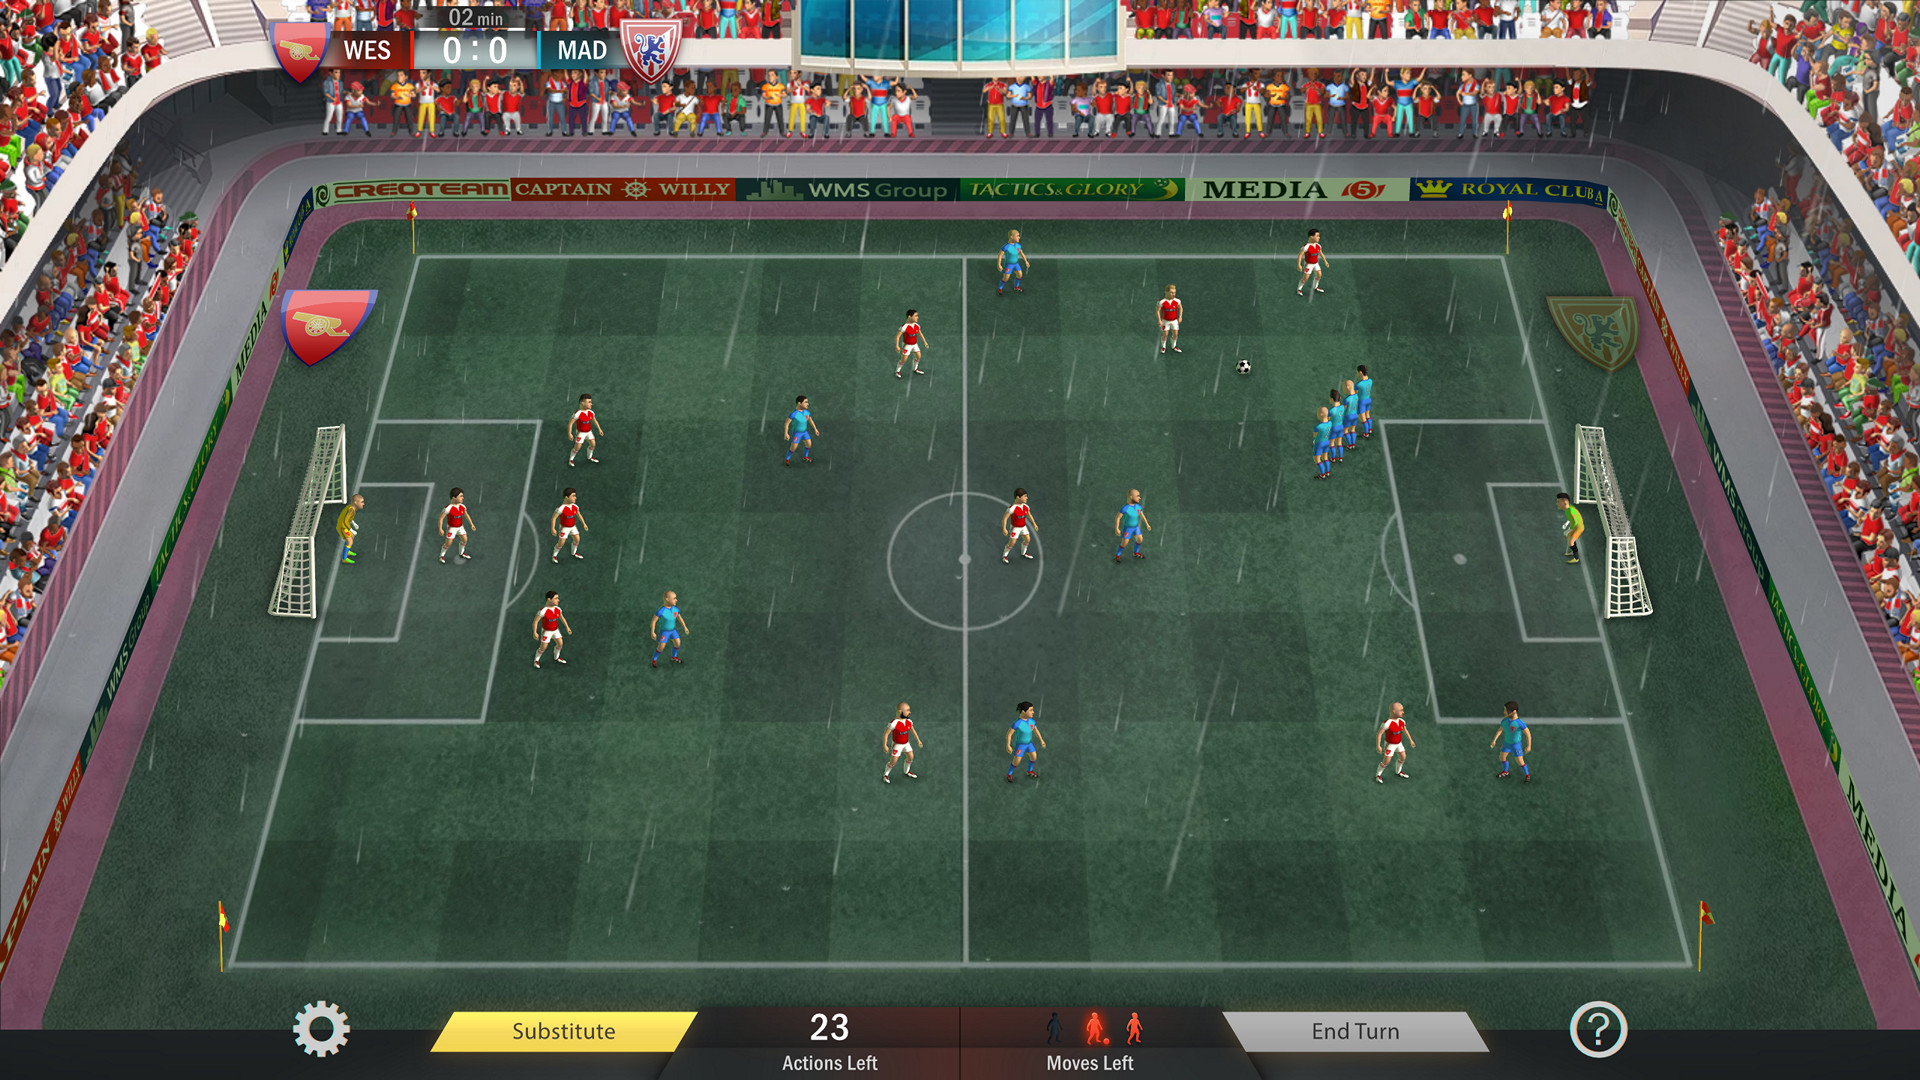 download steam football tactics and glory